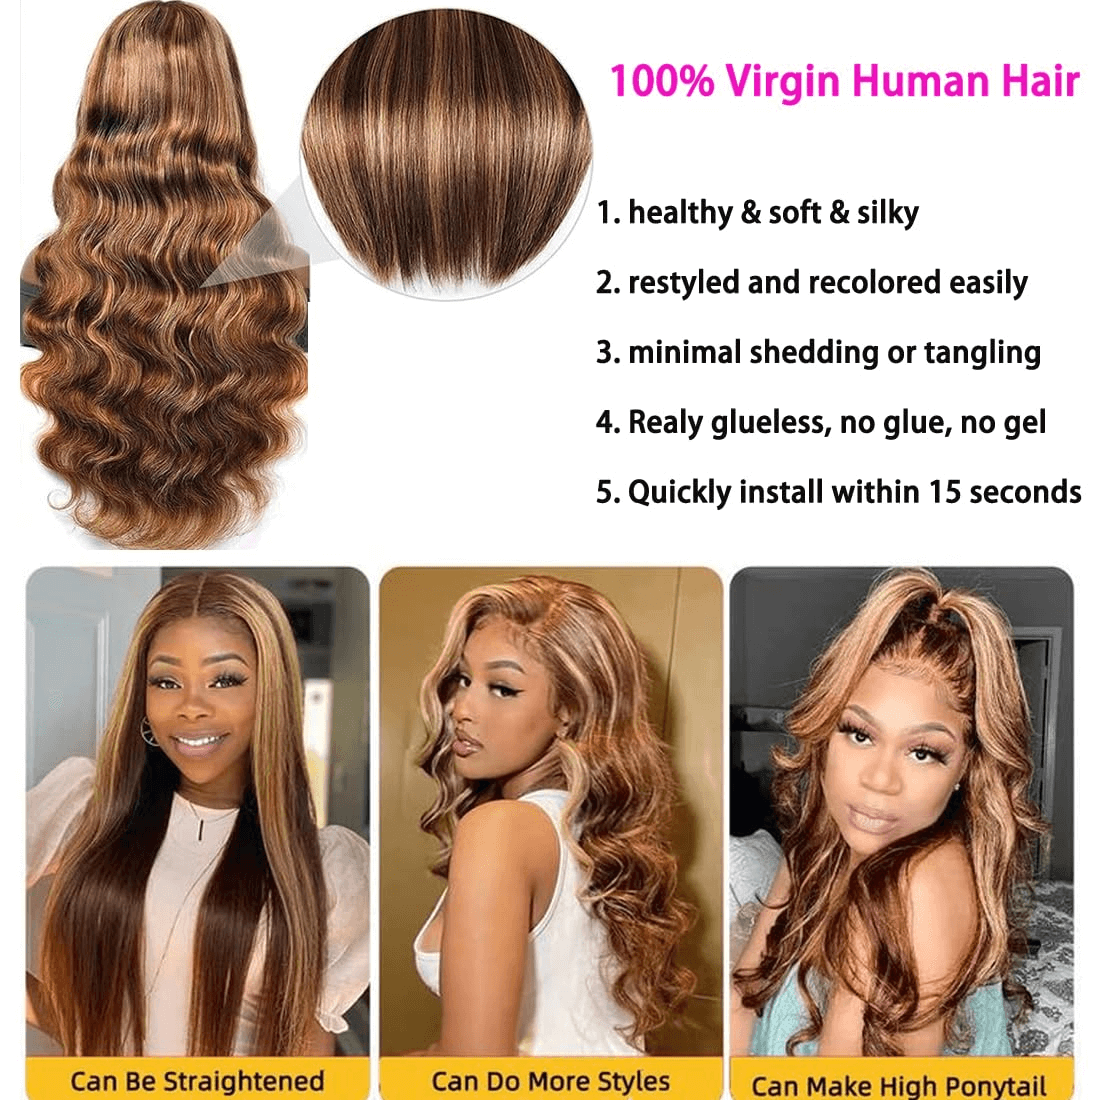 Wesface Wigs  Highlight 4x4 Transparent Lace Closure Wigs Human Hair Body Wave Glueless Wigs Pre Plucked 180 Density 4/27 Honey Blonde Ombre Balayage Colored Human Hair Wigs for Black Women